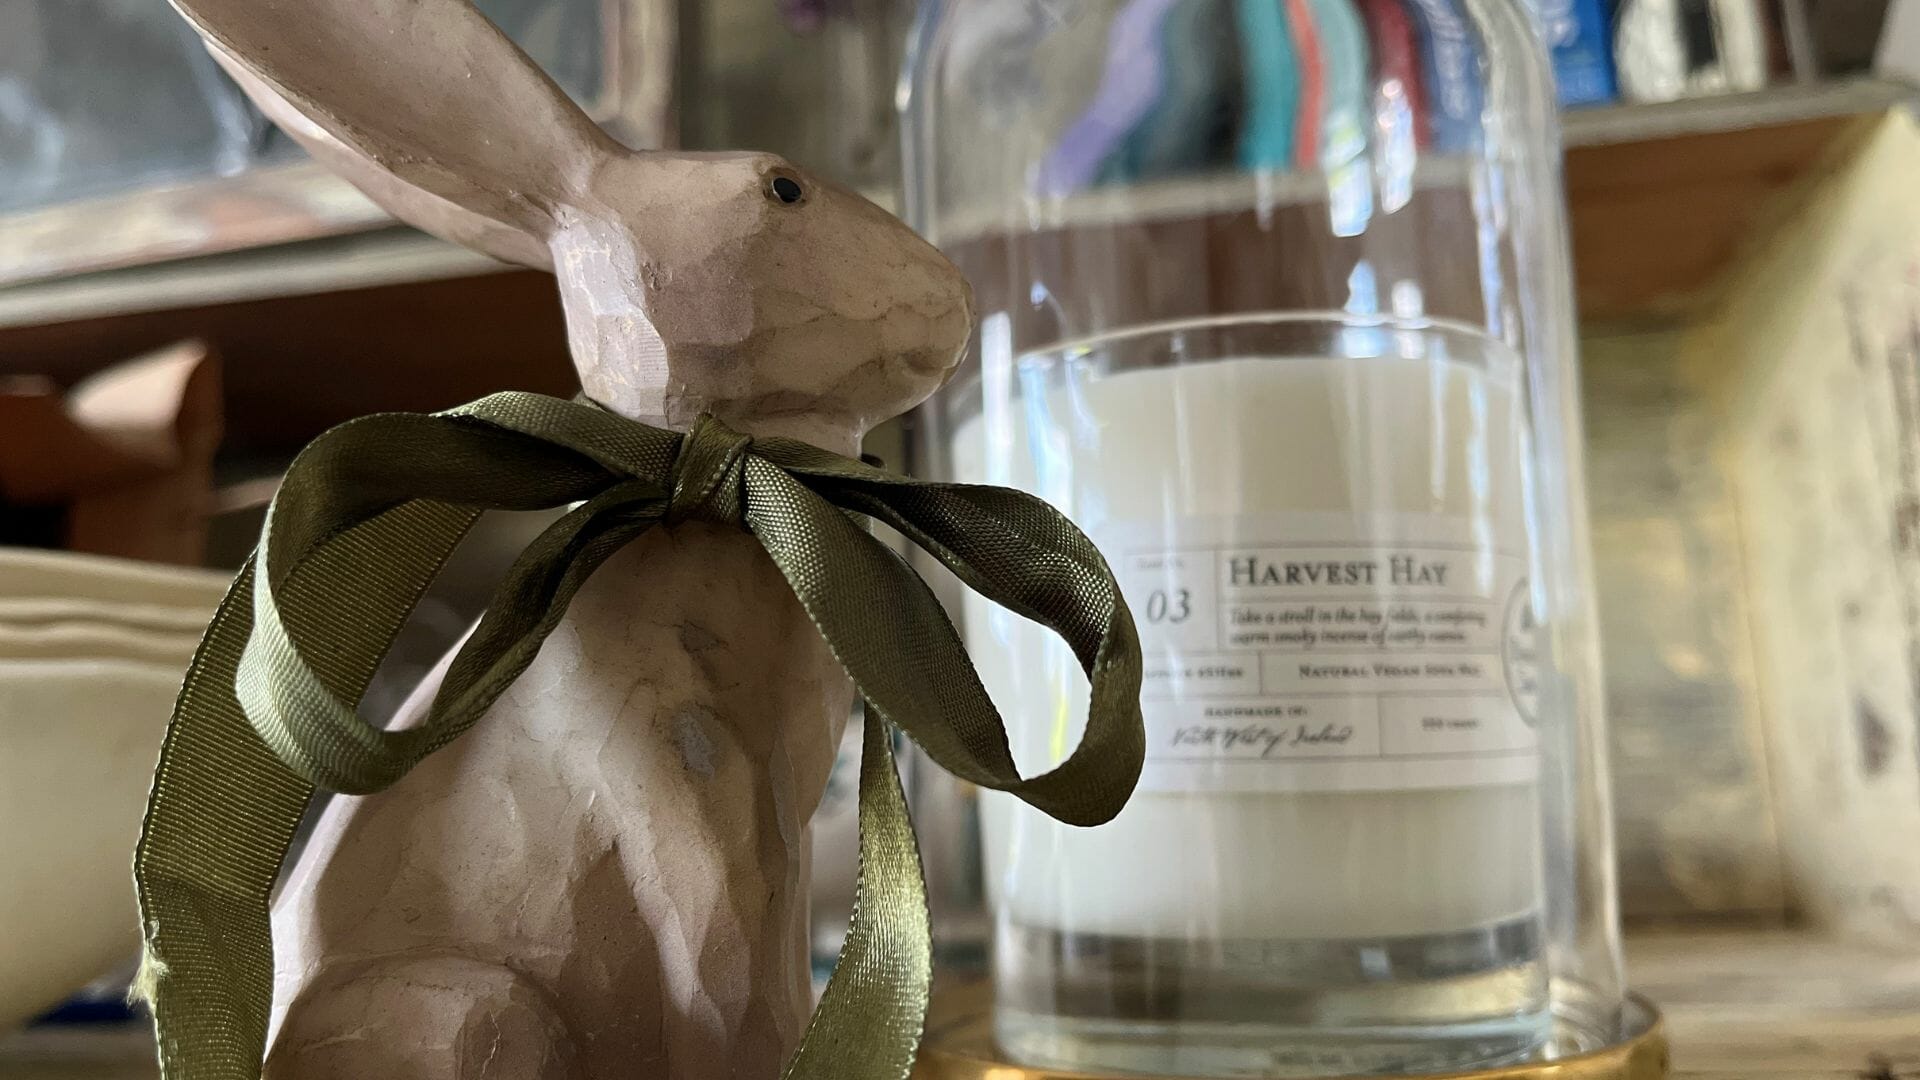 Wooden hare with green bow looking at white candle in glass dome.